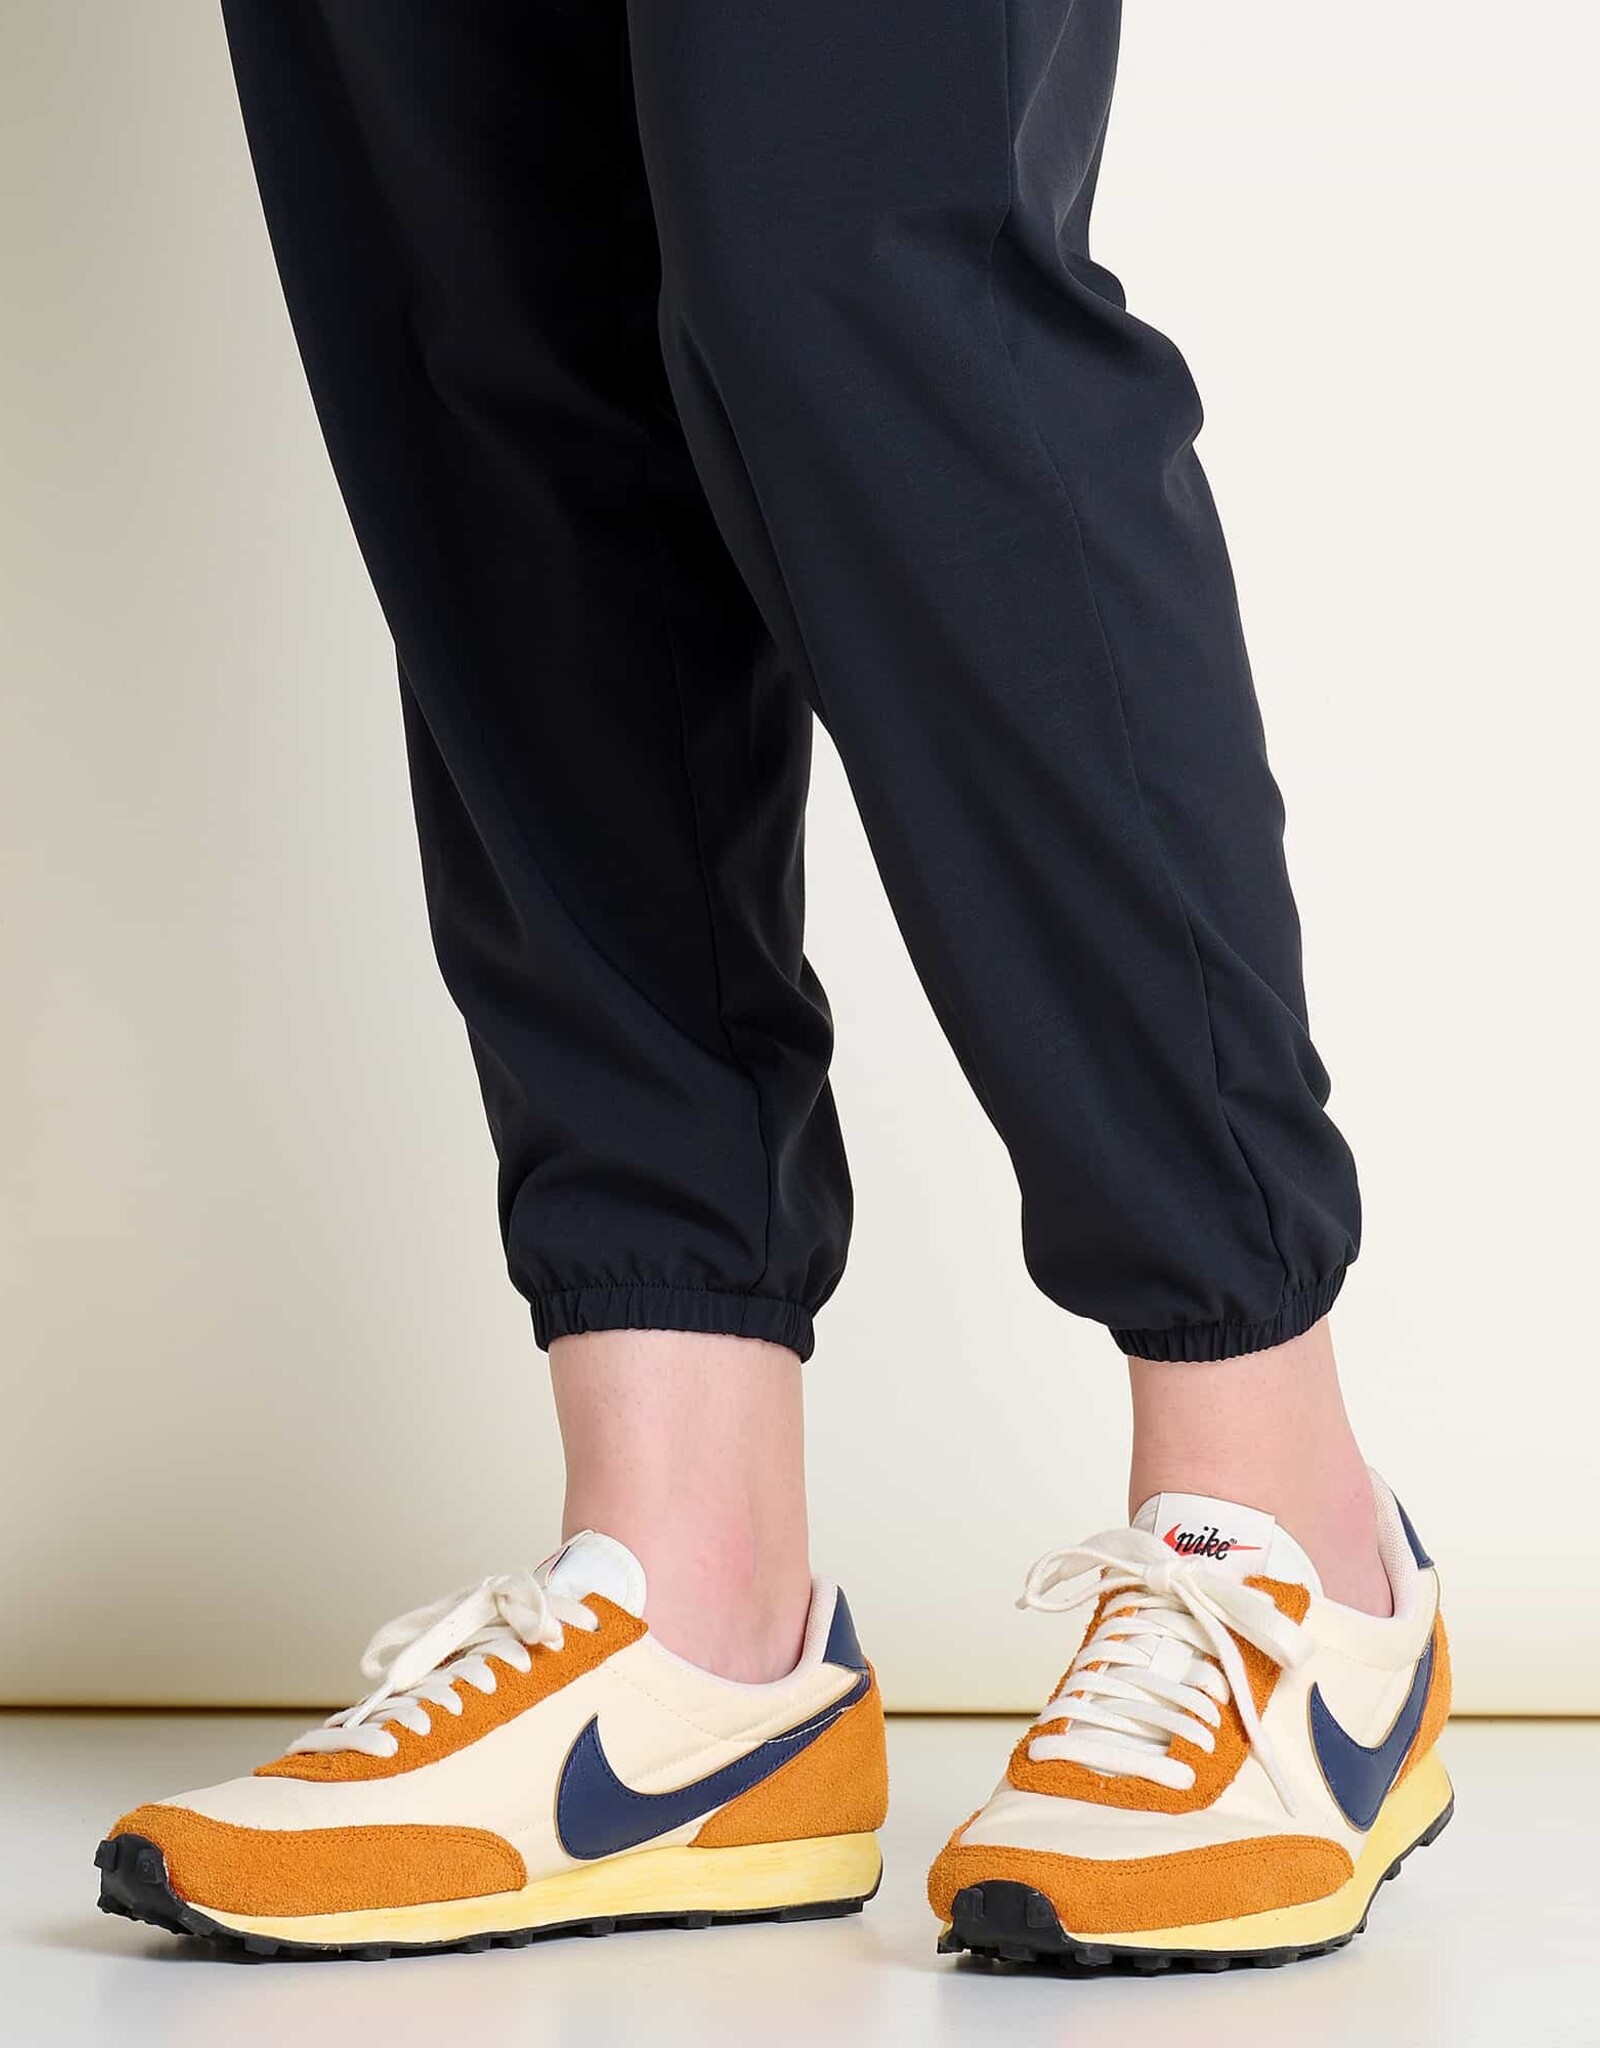 Toad&Co Sunkissed Jogger